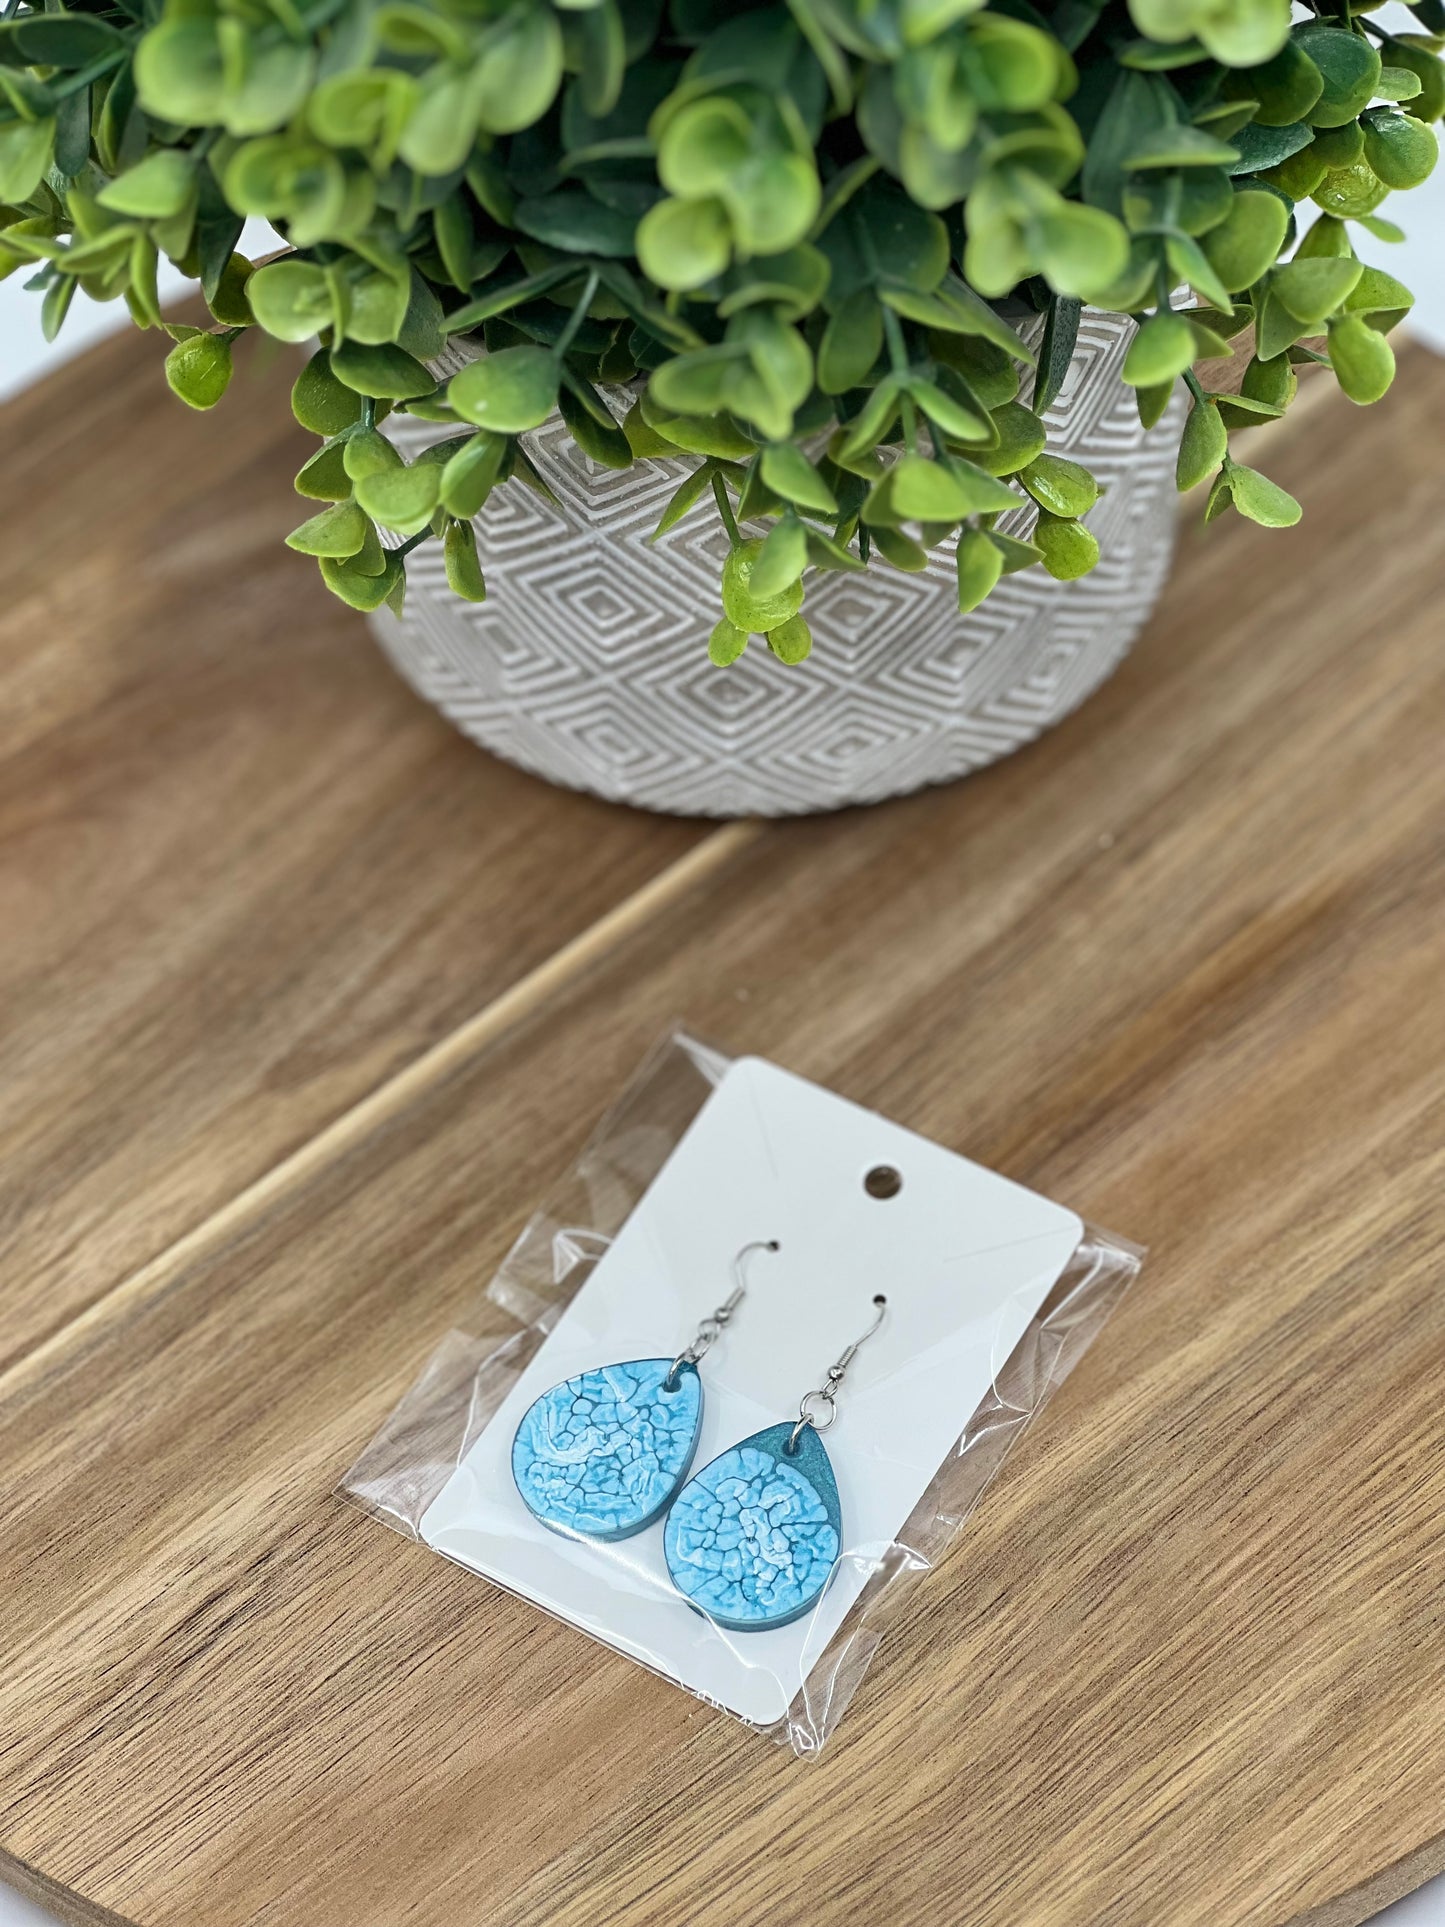 Earrings - Hand Made Resin Tear Drop Earrings, Blue and Unique White pattern